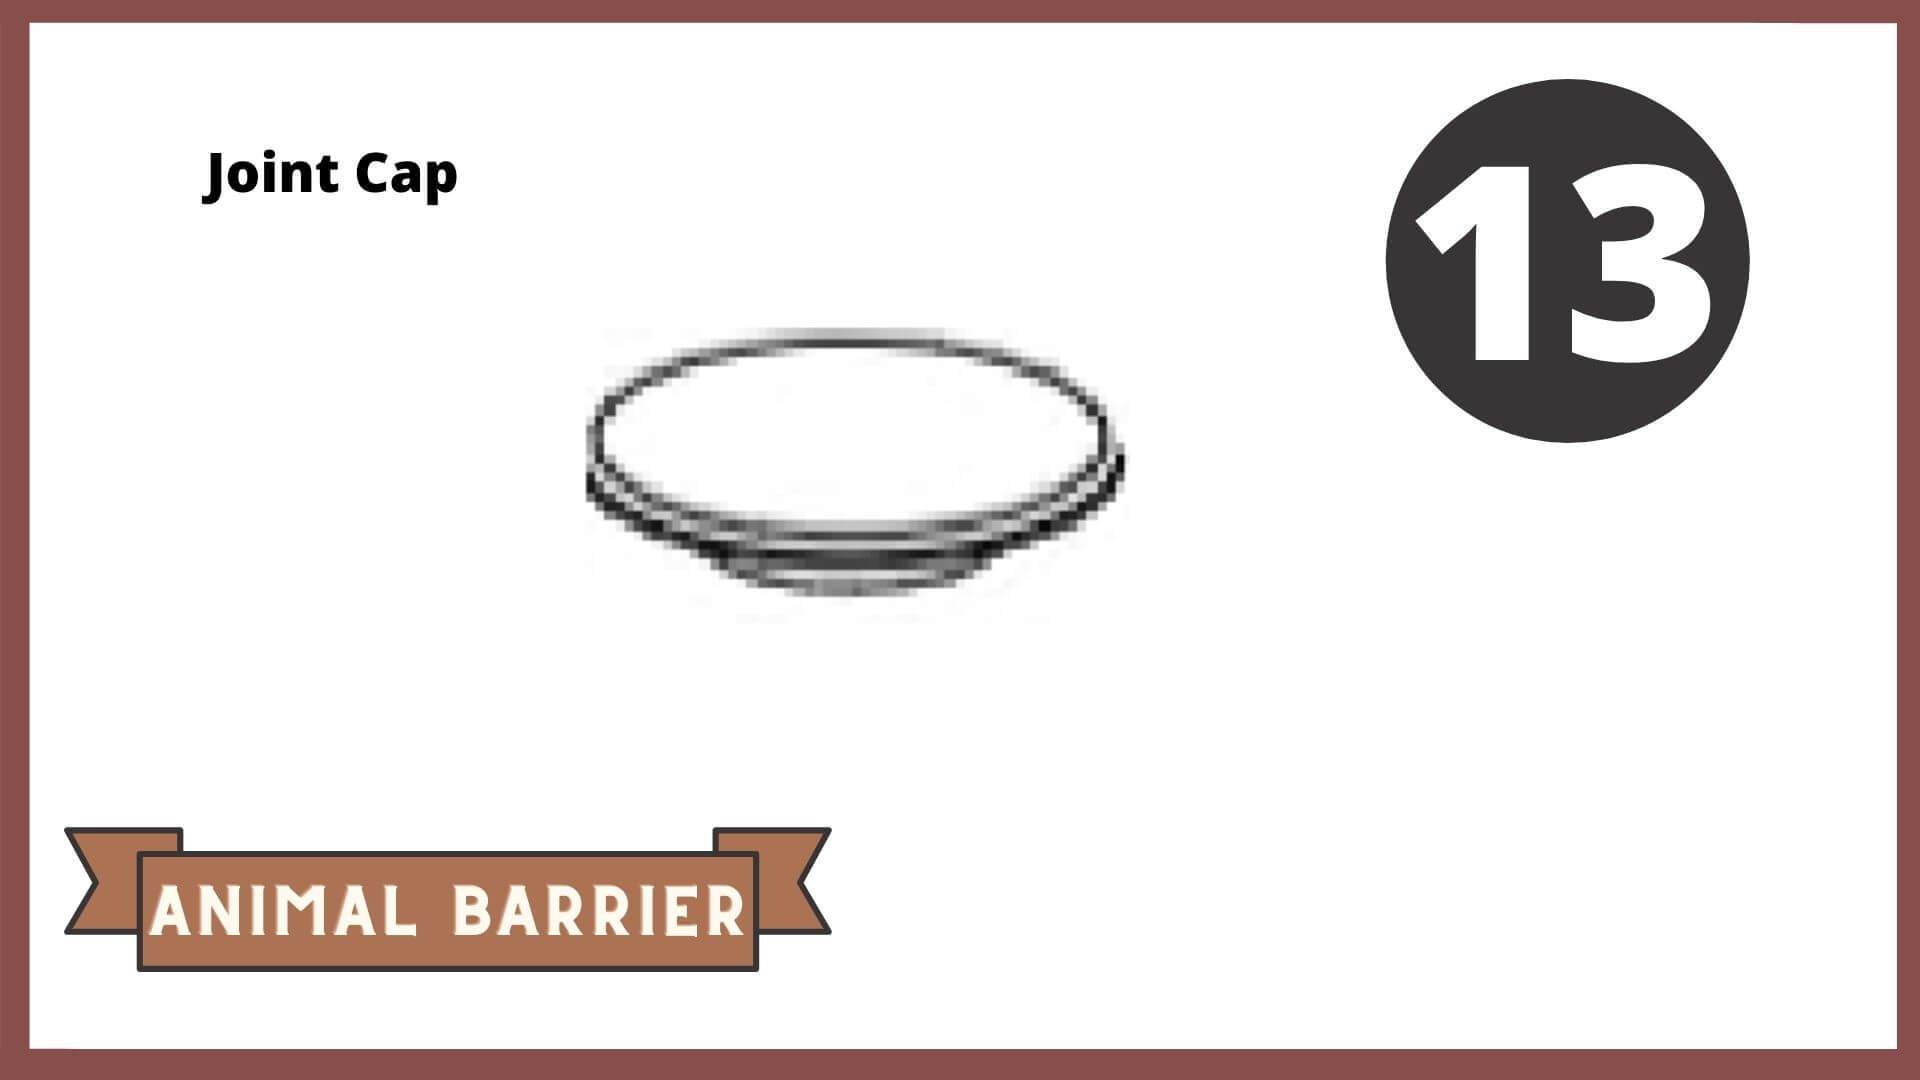 REPLACEMENT PARTS for: Stack & Extend Animal Barrier Kits & Gardens Accessories Frame It All Part #13 - Tube Cap 